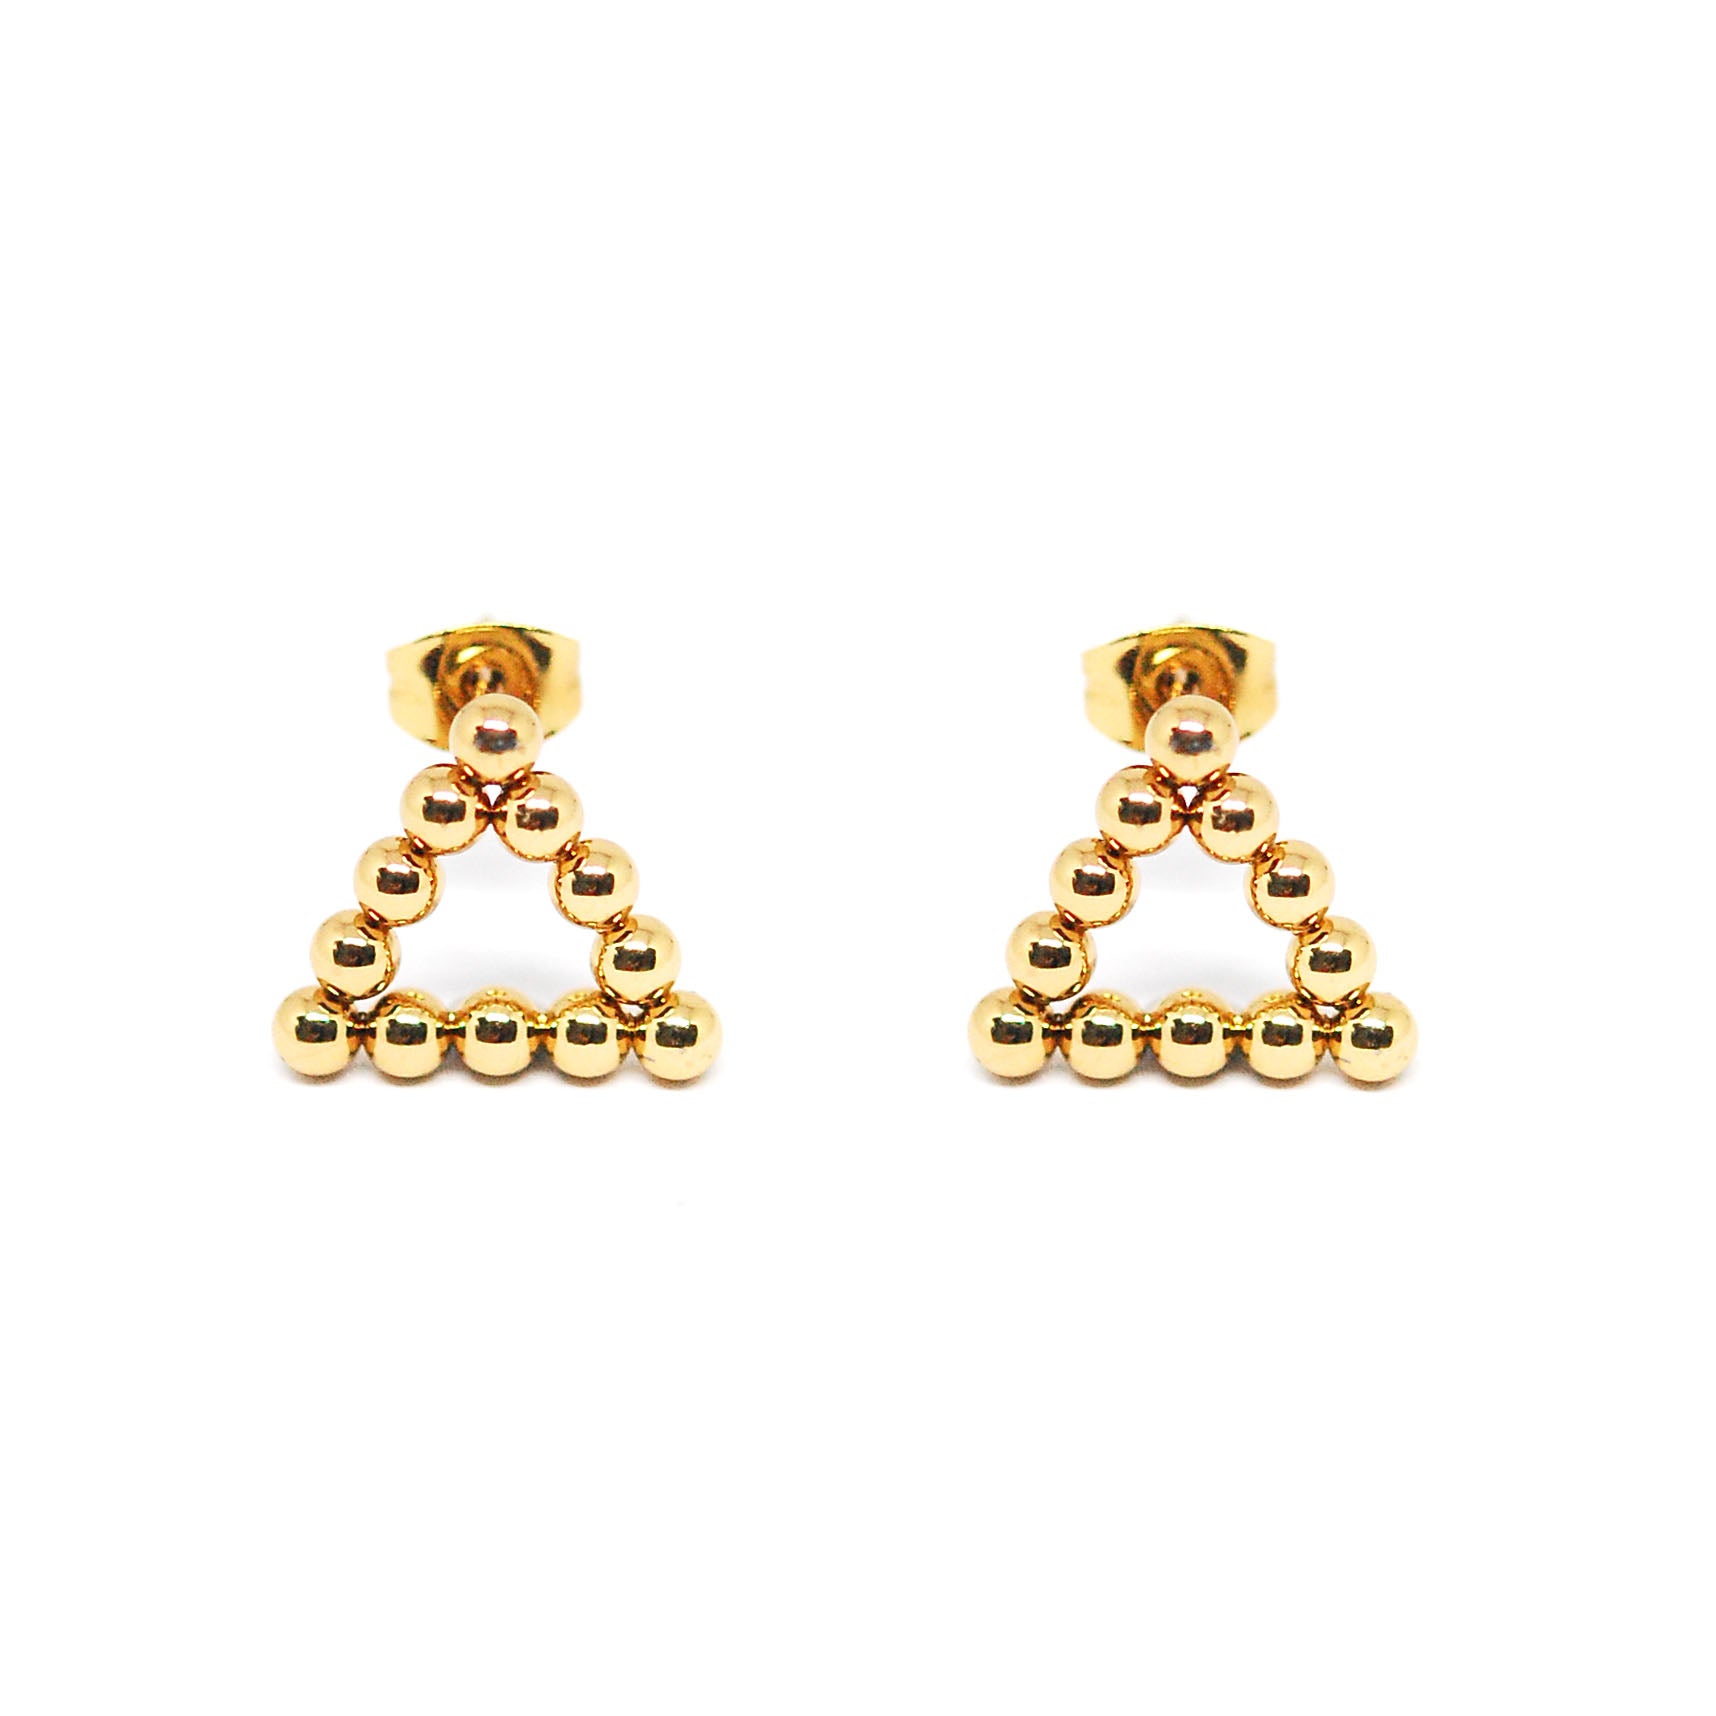 ESE 7698: All IPG Multi-Ball Triangle Earrings (12mm)